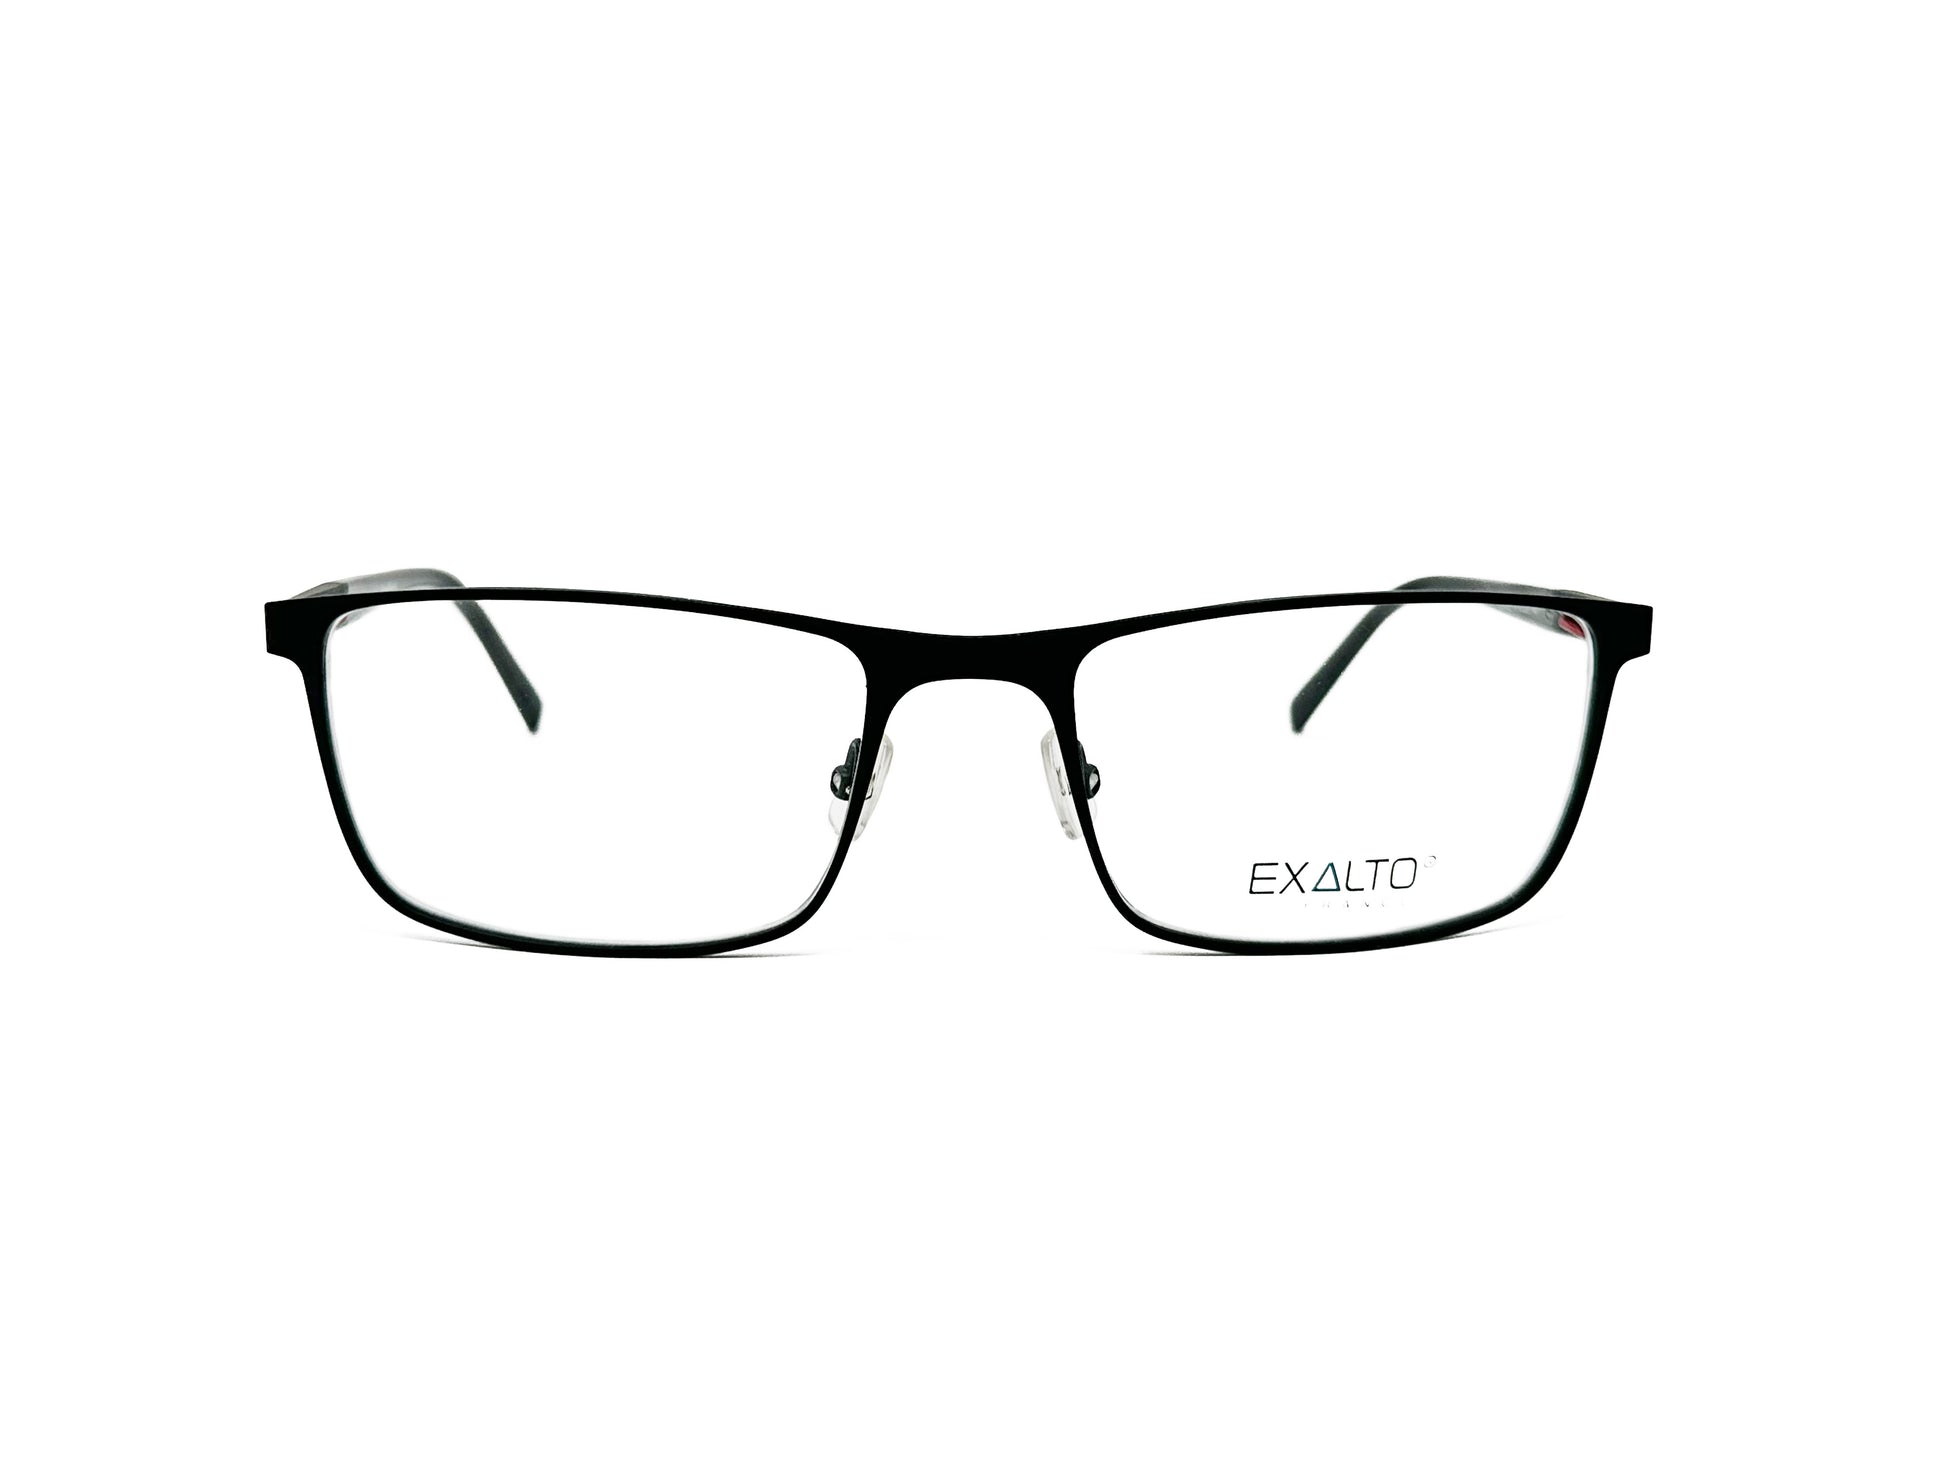 Exalto rectangular, metal optical frame. Model: 65N123. Color: Black with red strip on temple. Front view. 